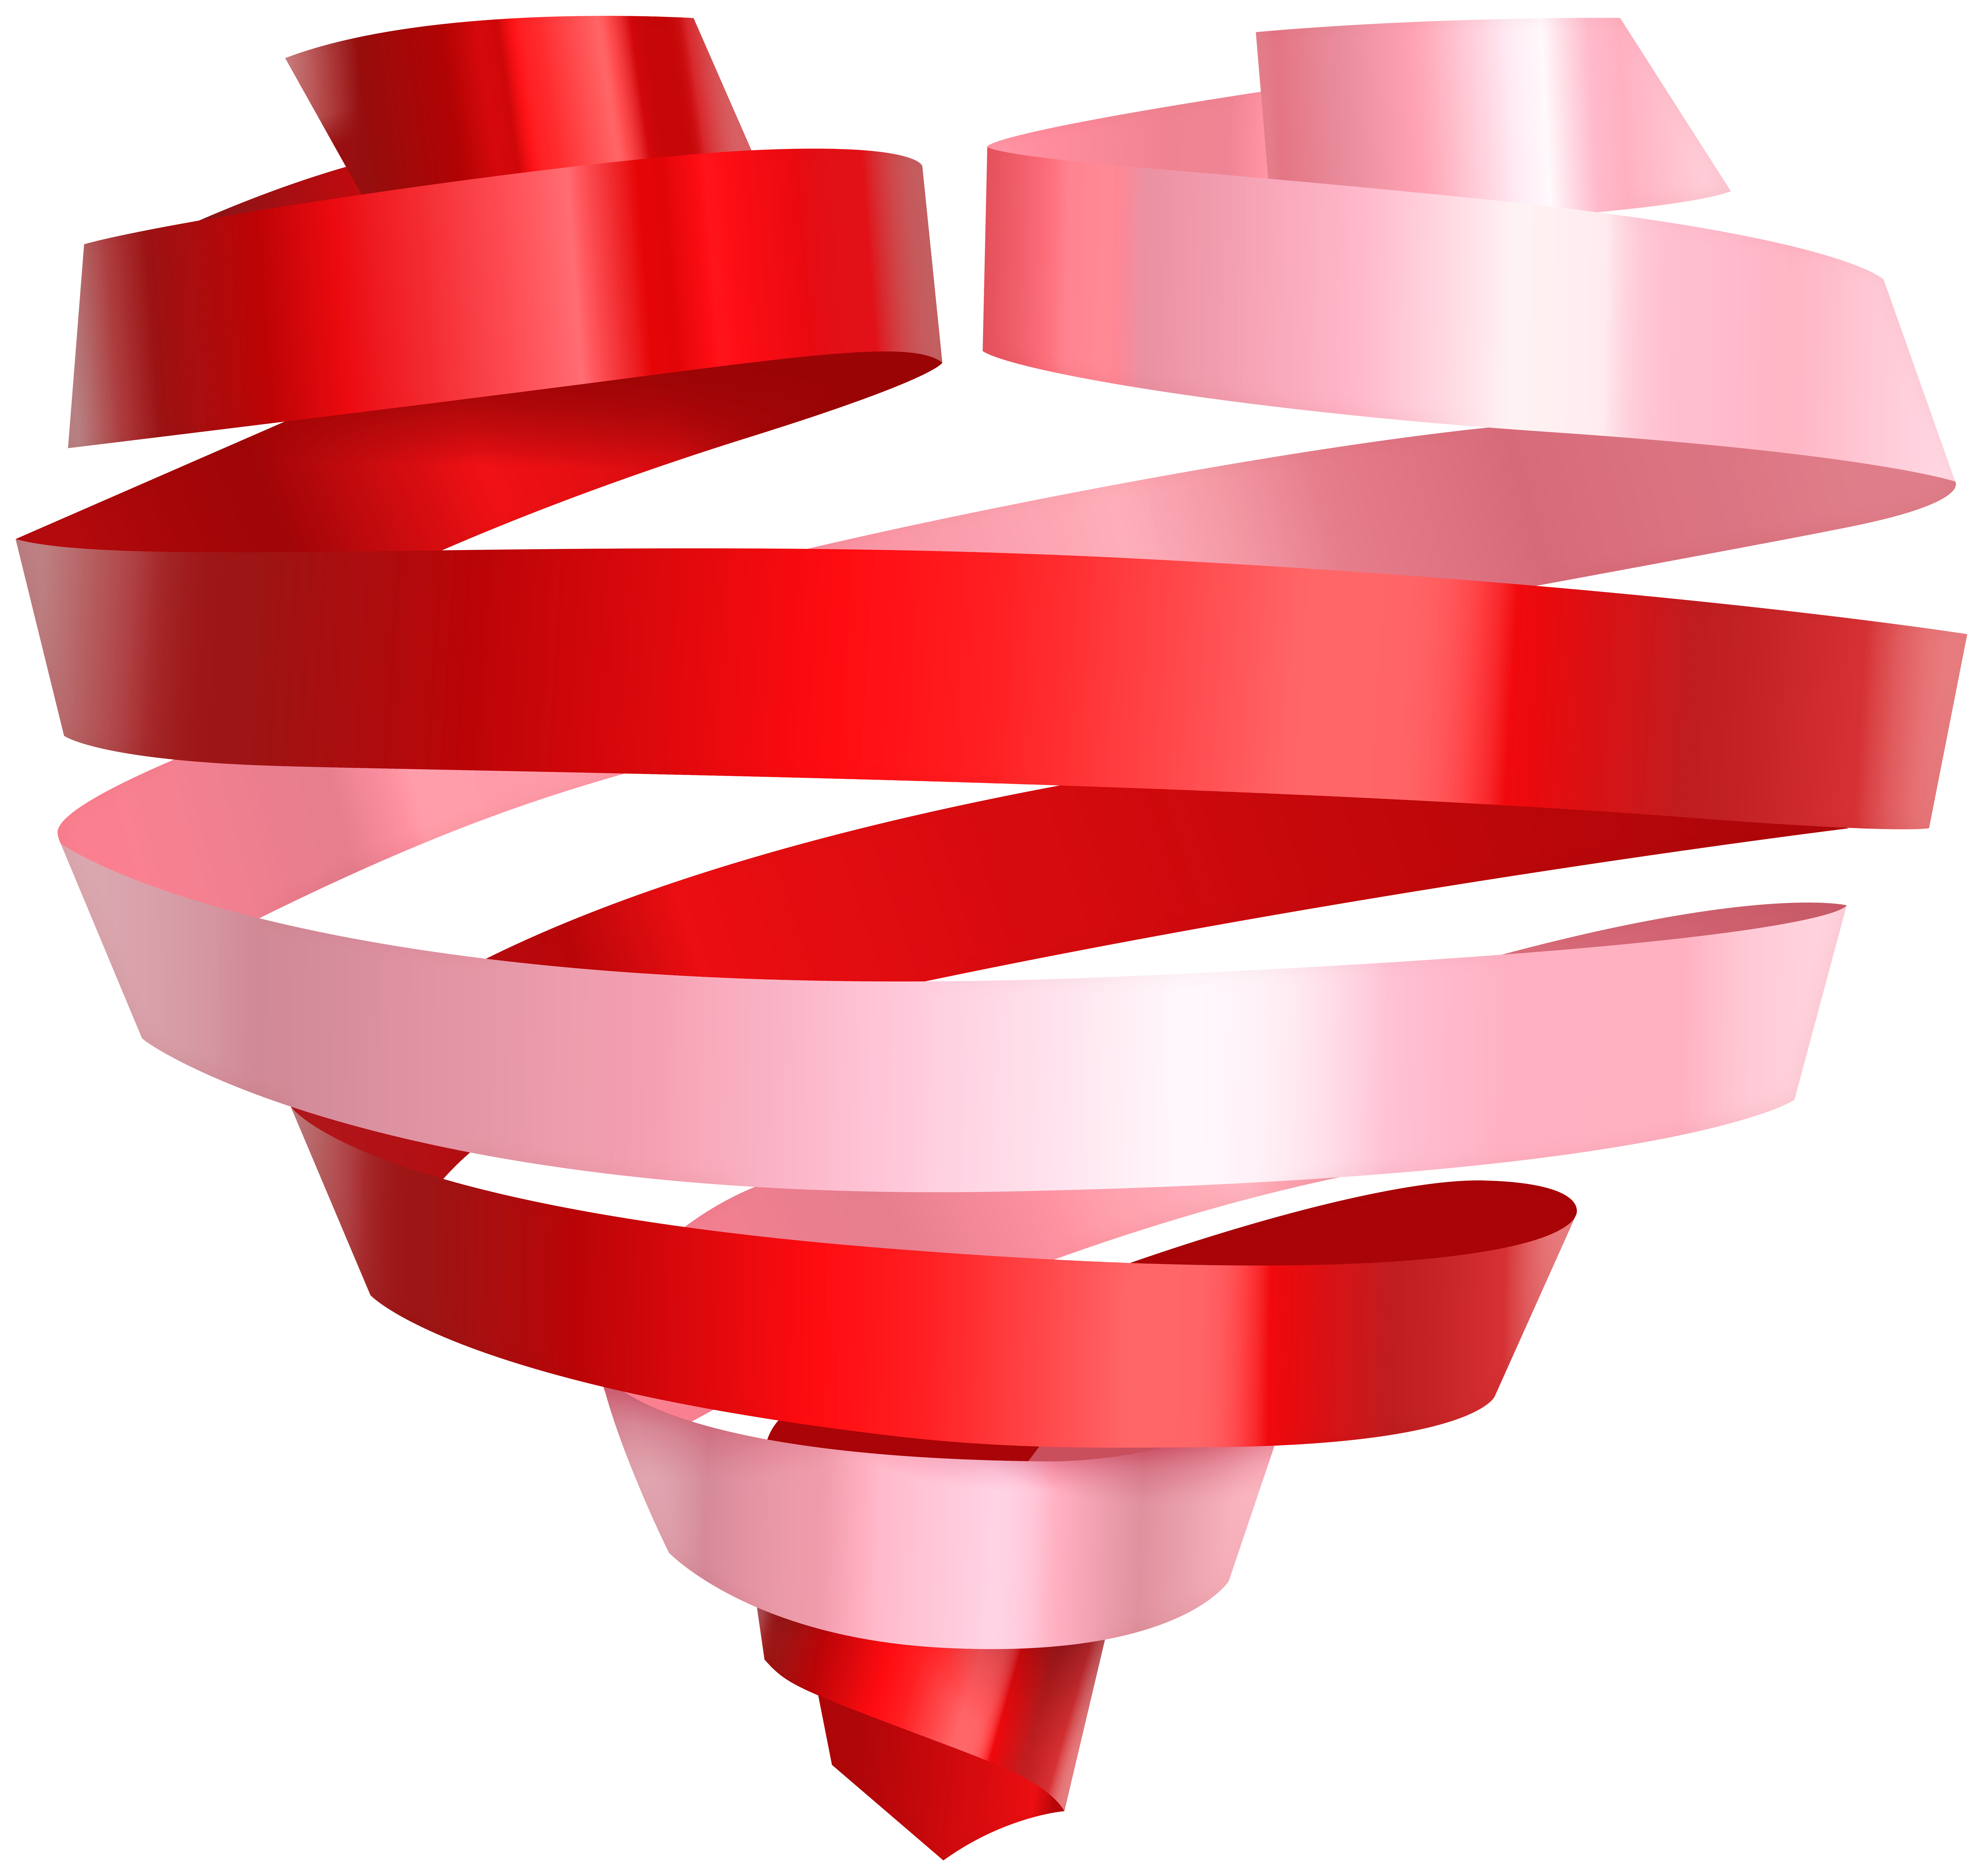 Ribbon Heart Transparent Image​  Gallery Yopriceville - High-Quality Free  Images and Transparent PNG Clipart